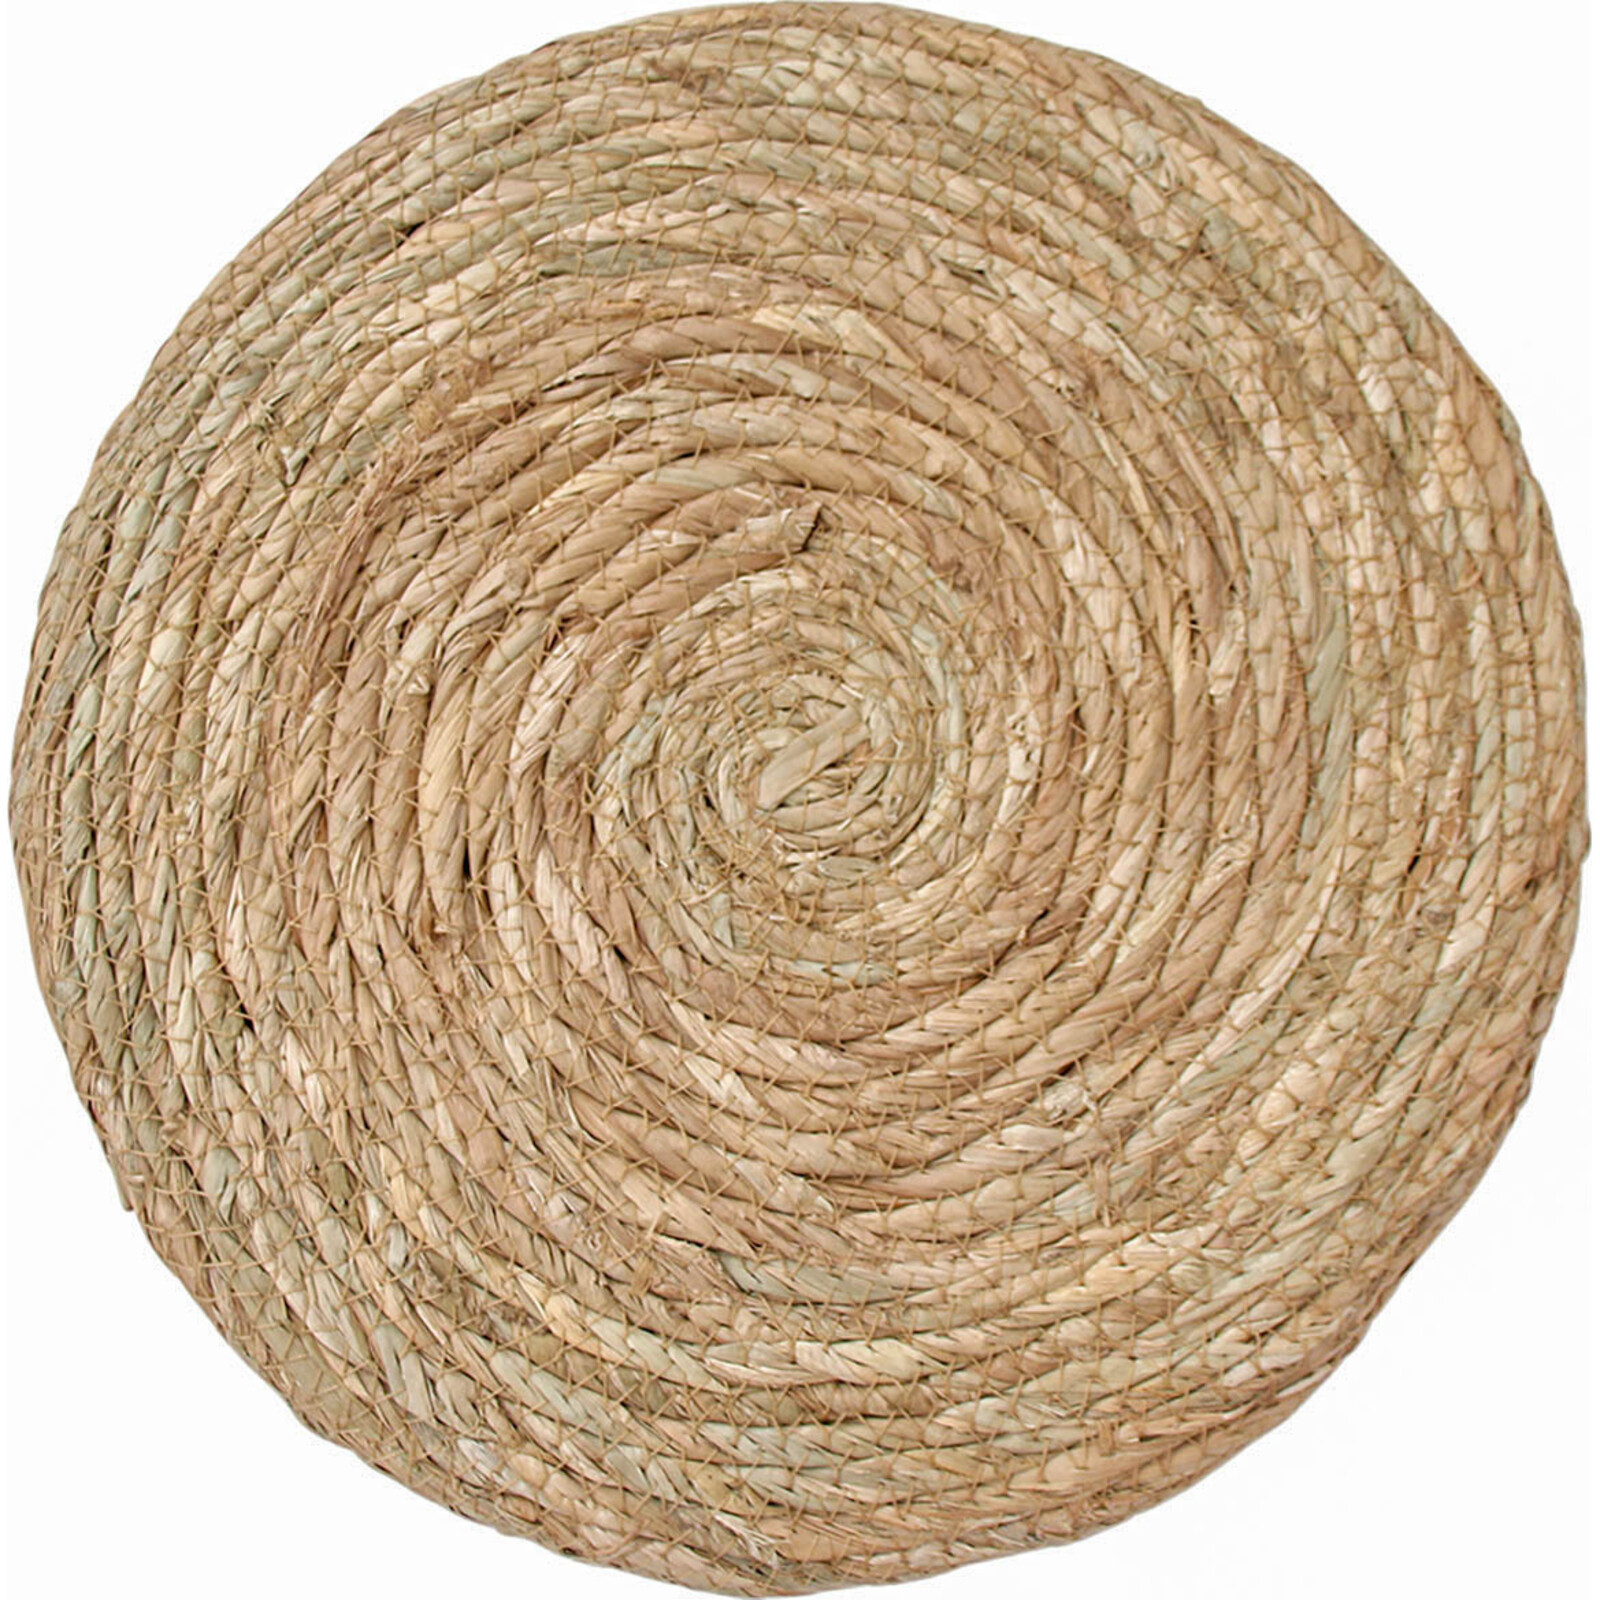 Placemat Seagrass Rope Natural